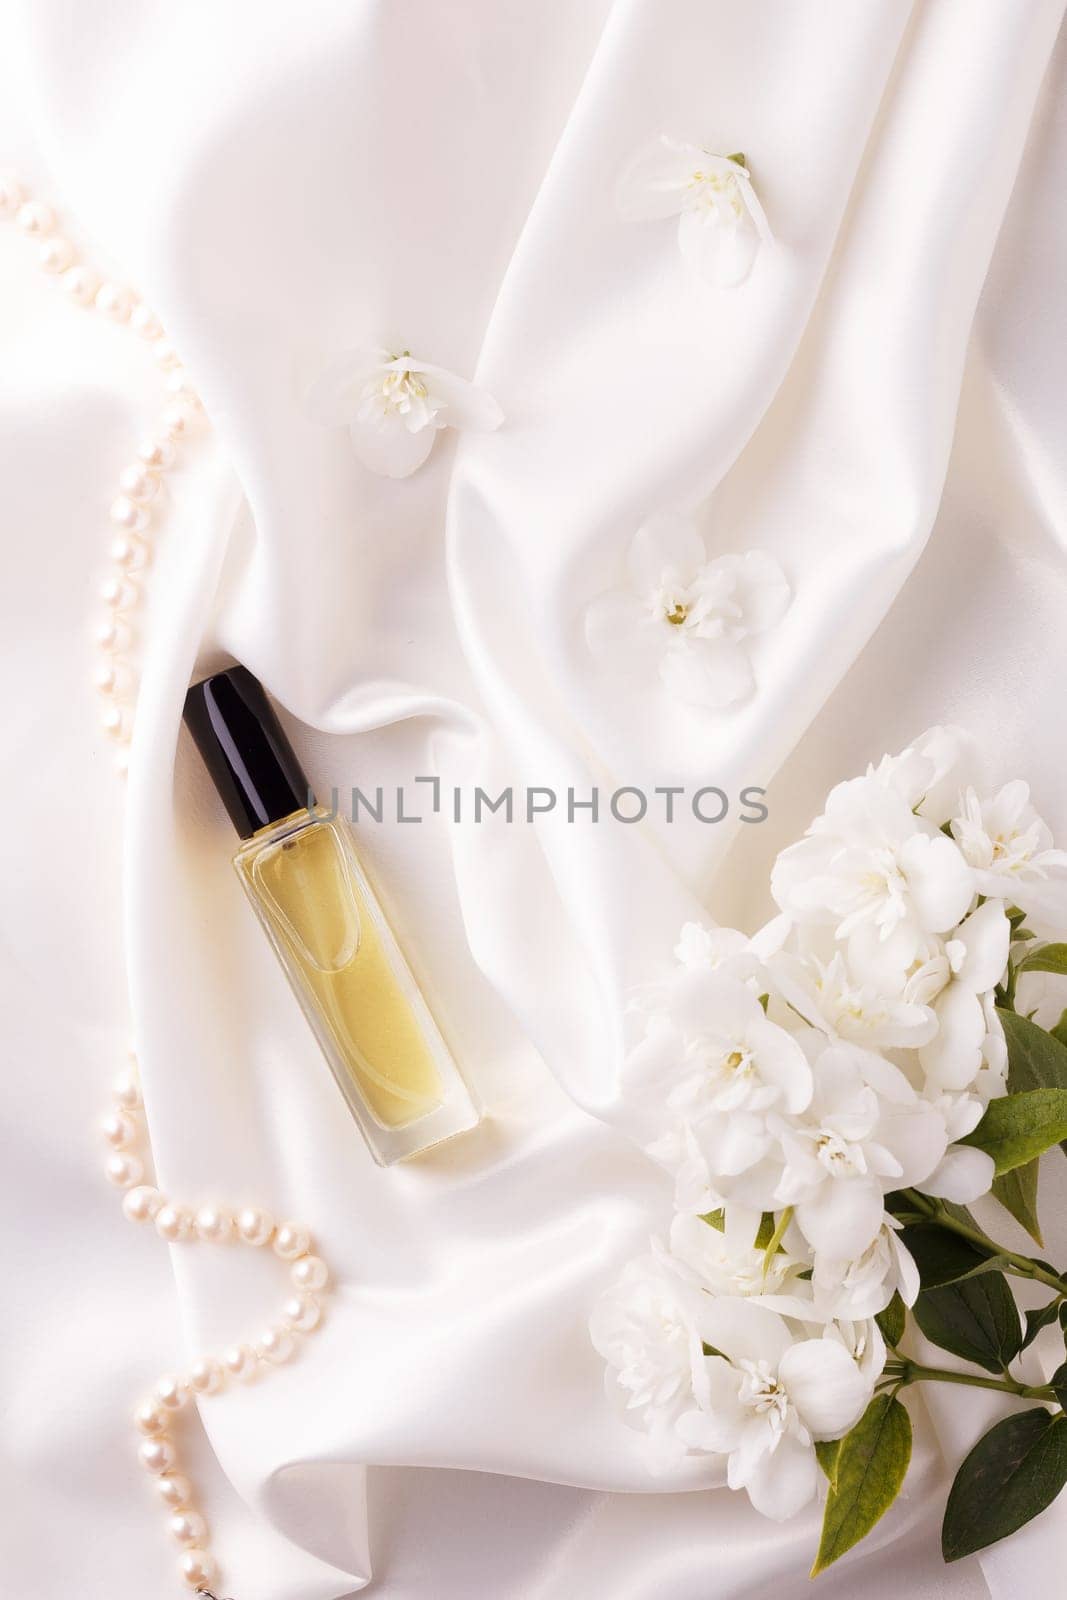 Perfume bottle with flowers on white satin fabric. by lara29